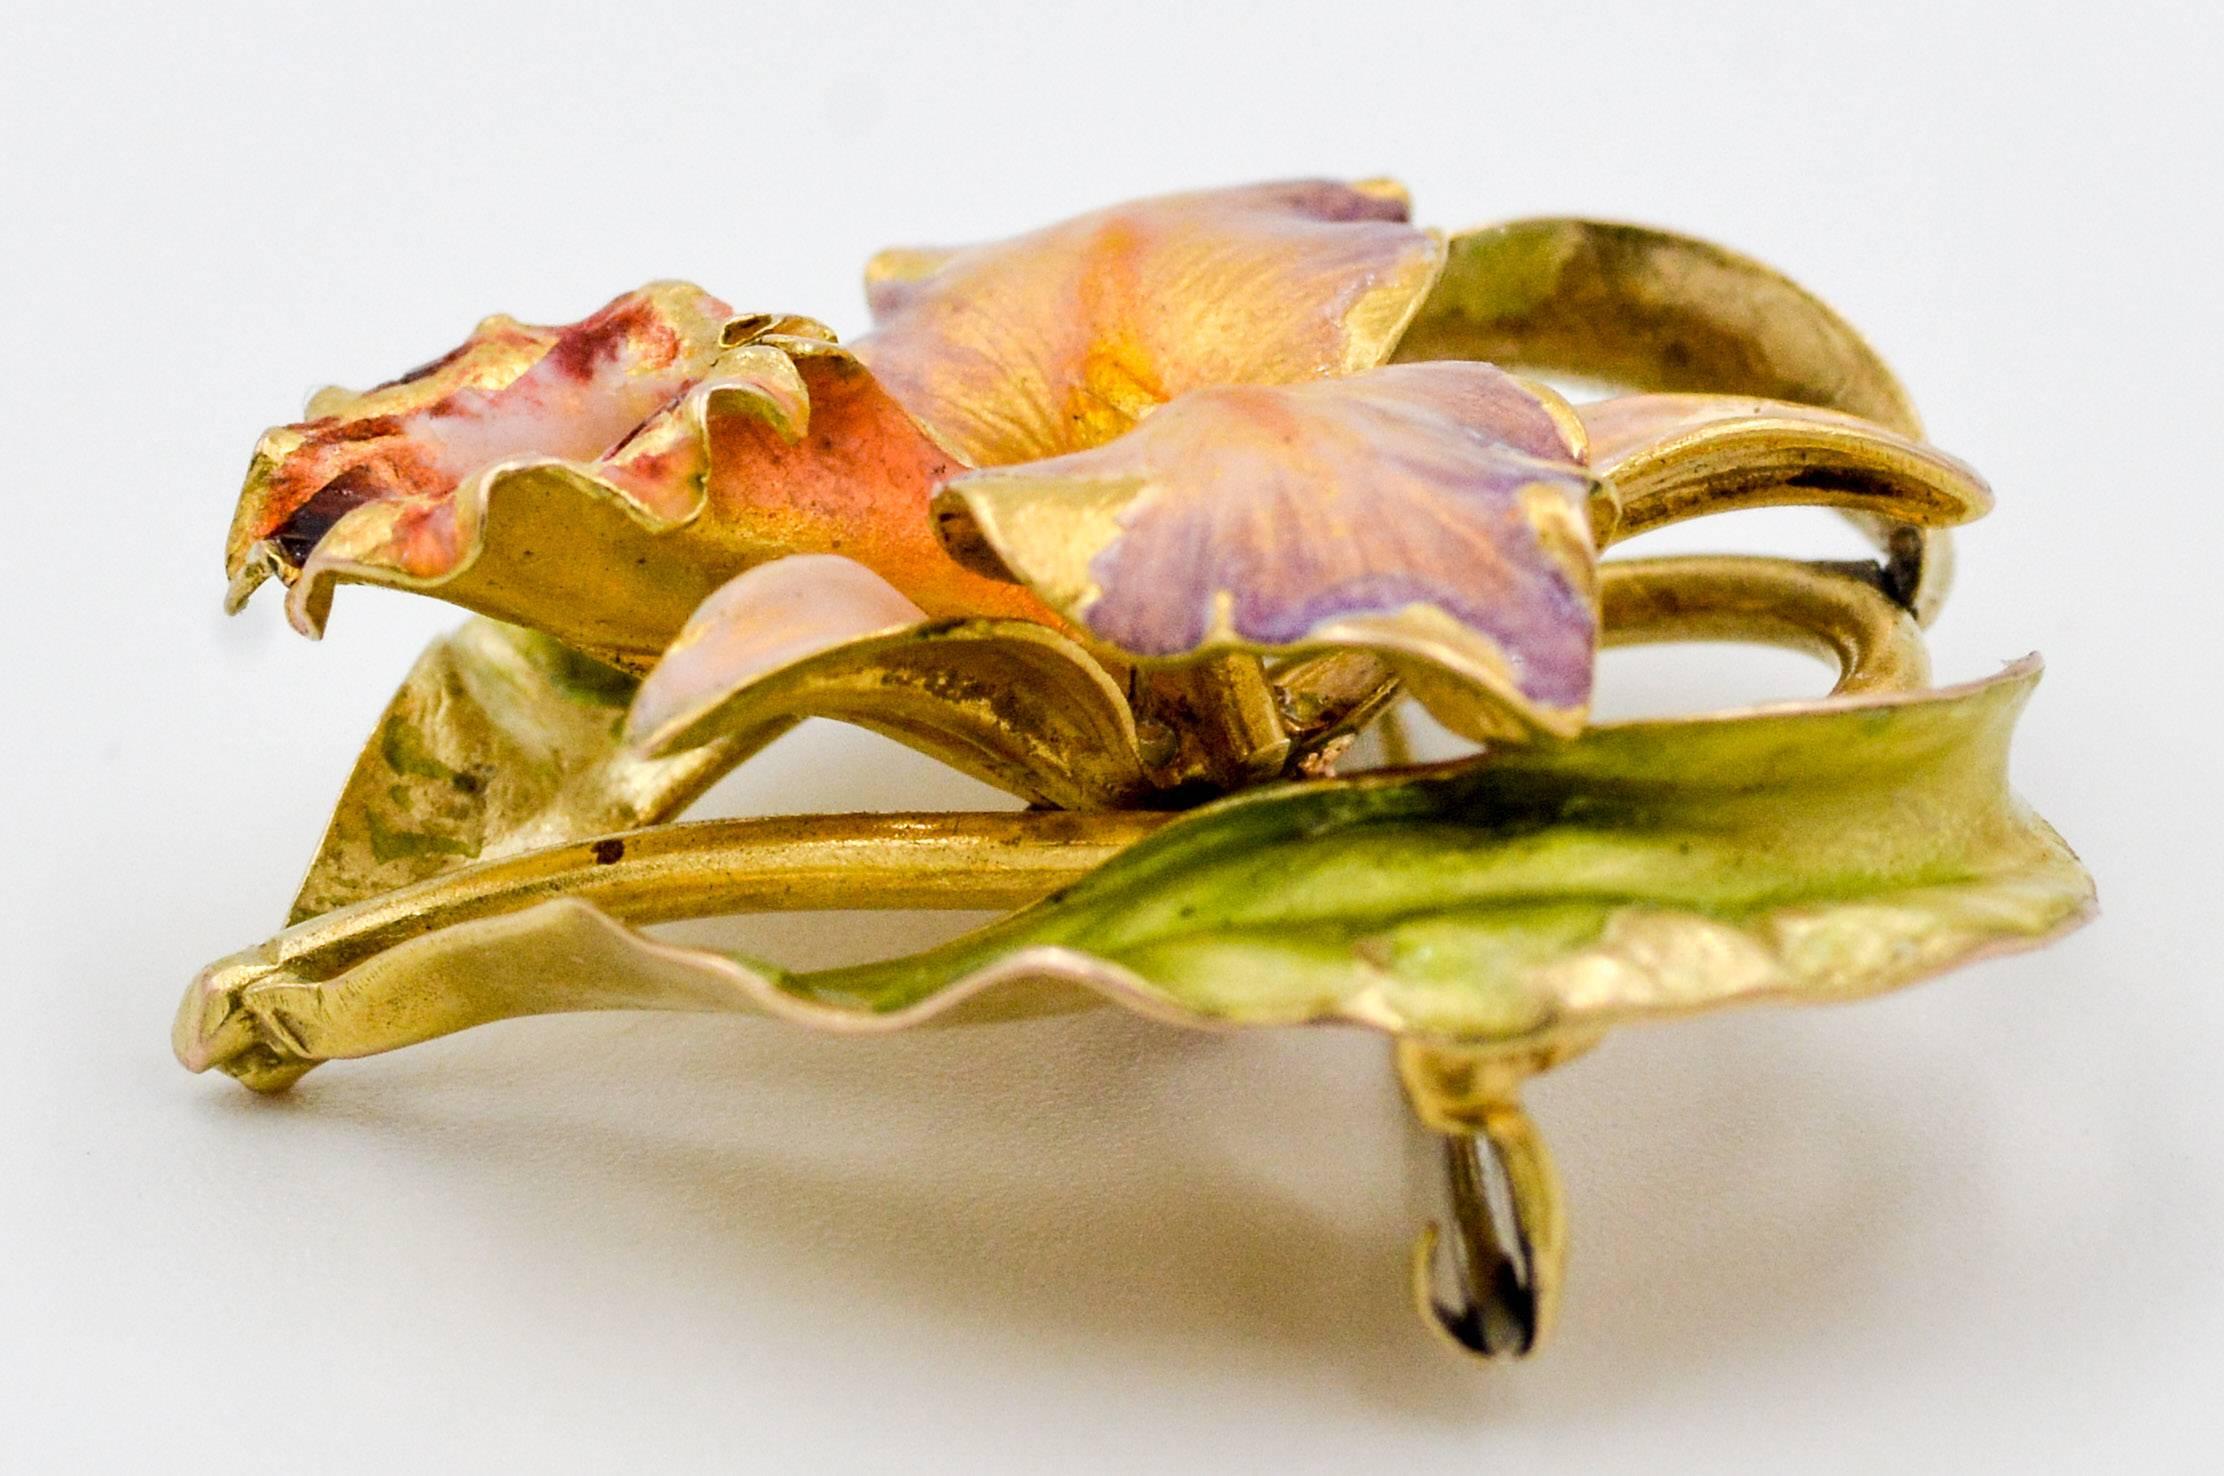 This classic Art Nouveau brooch pin is amazingly crafted to capture the likeness of an iris surrounded by leaves.  The pin is made of 14kt yellow gold and is enameled in a very life like fashion capturing the beauty of a flower that never dies.  